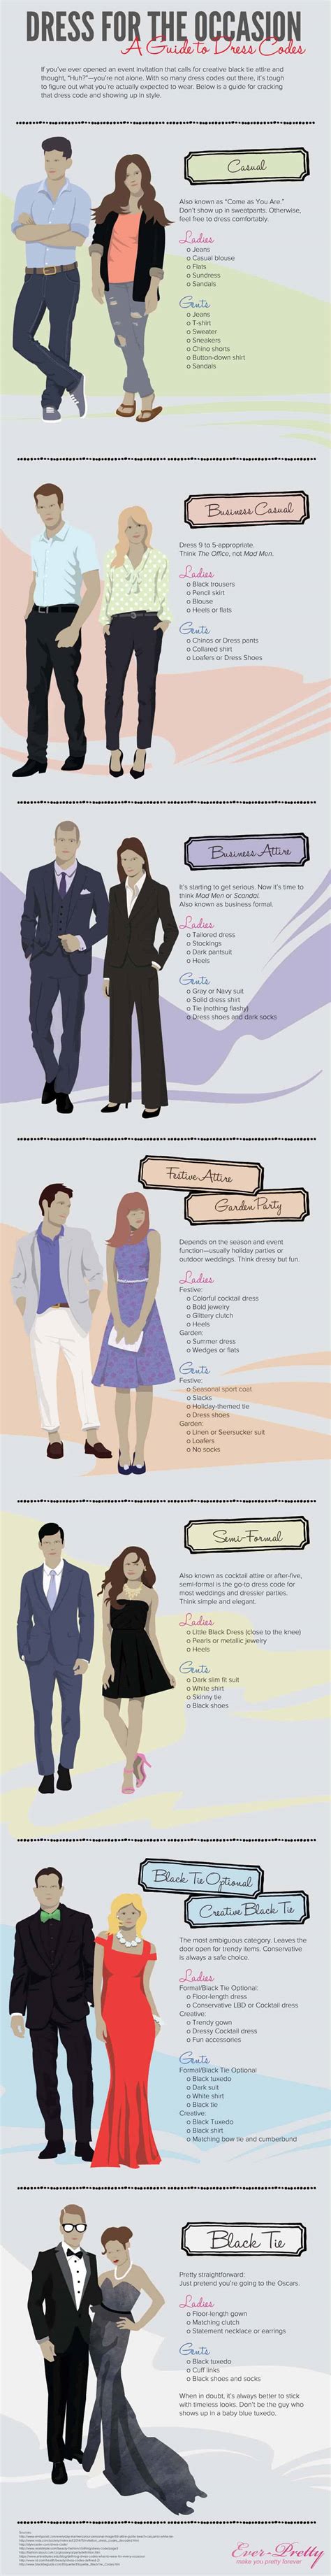 Business Casual Dress Code Infographic